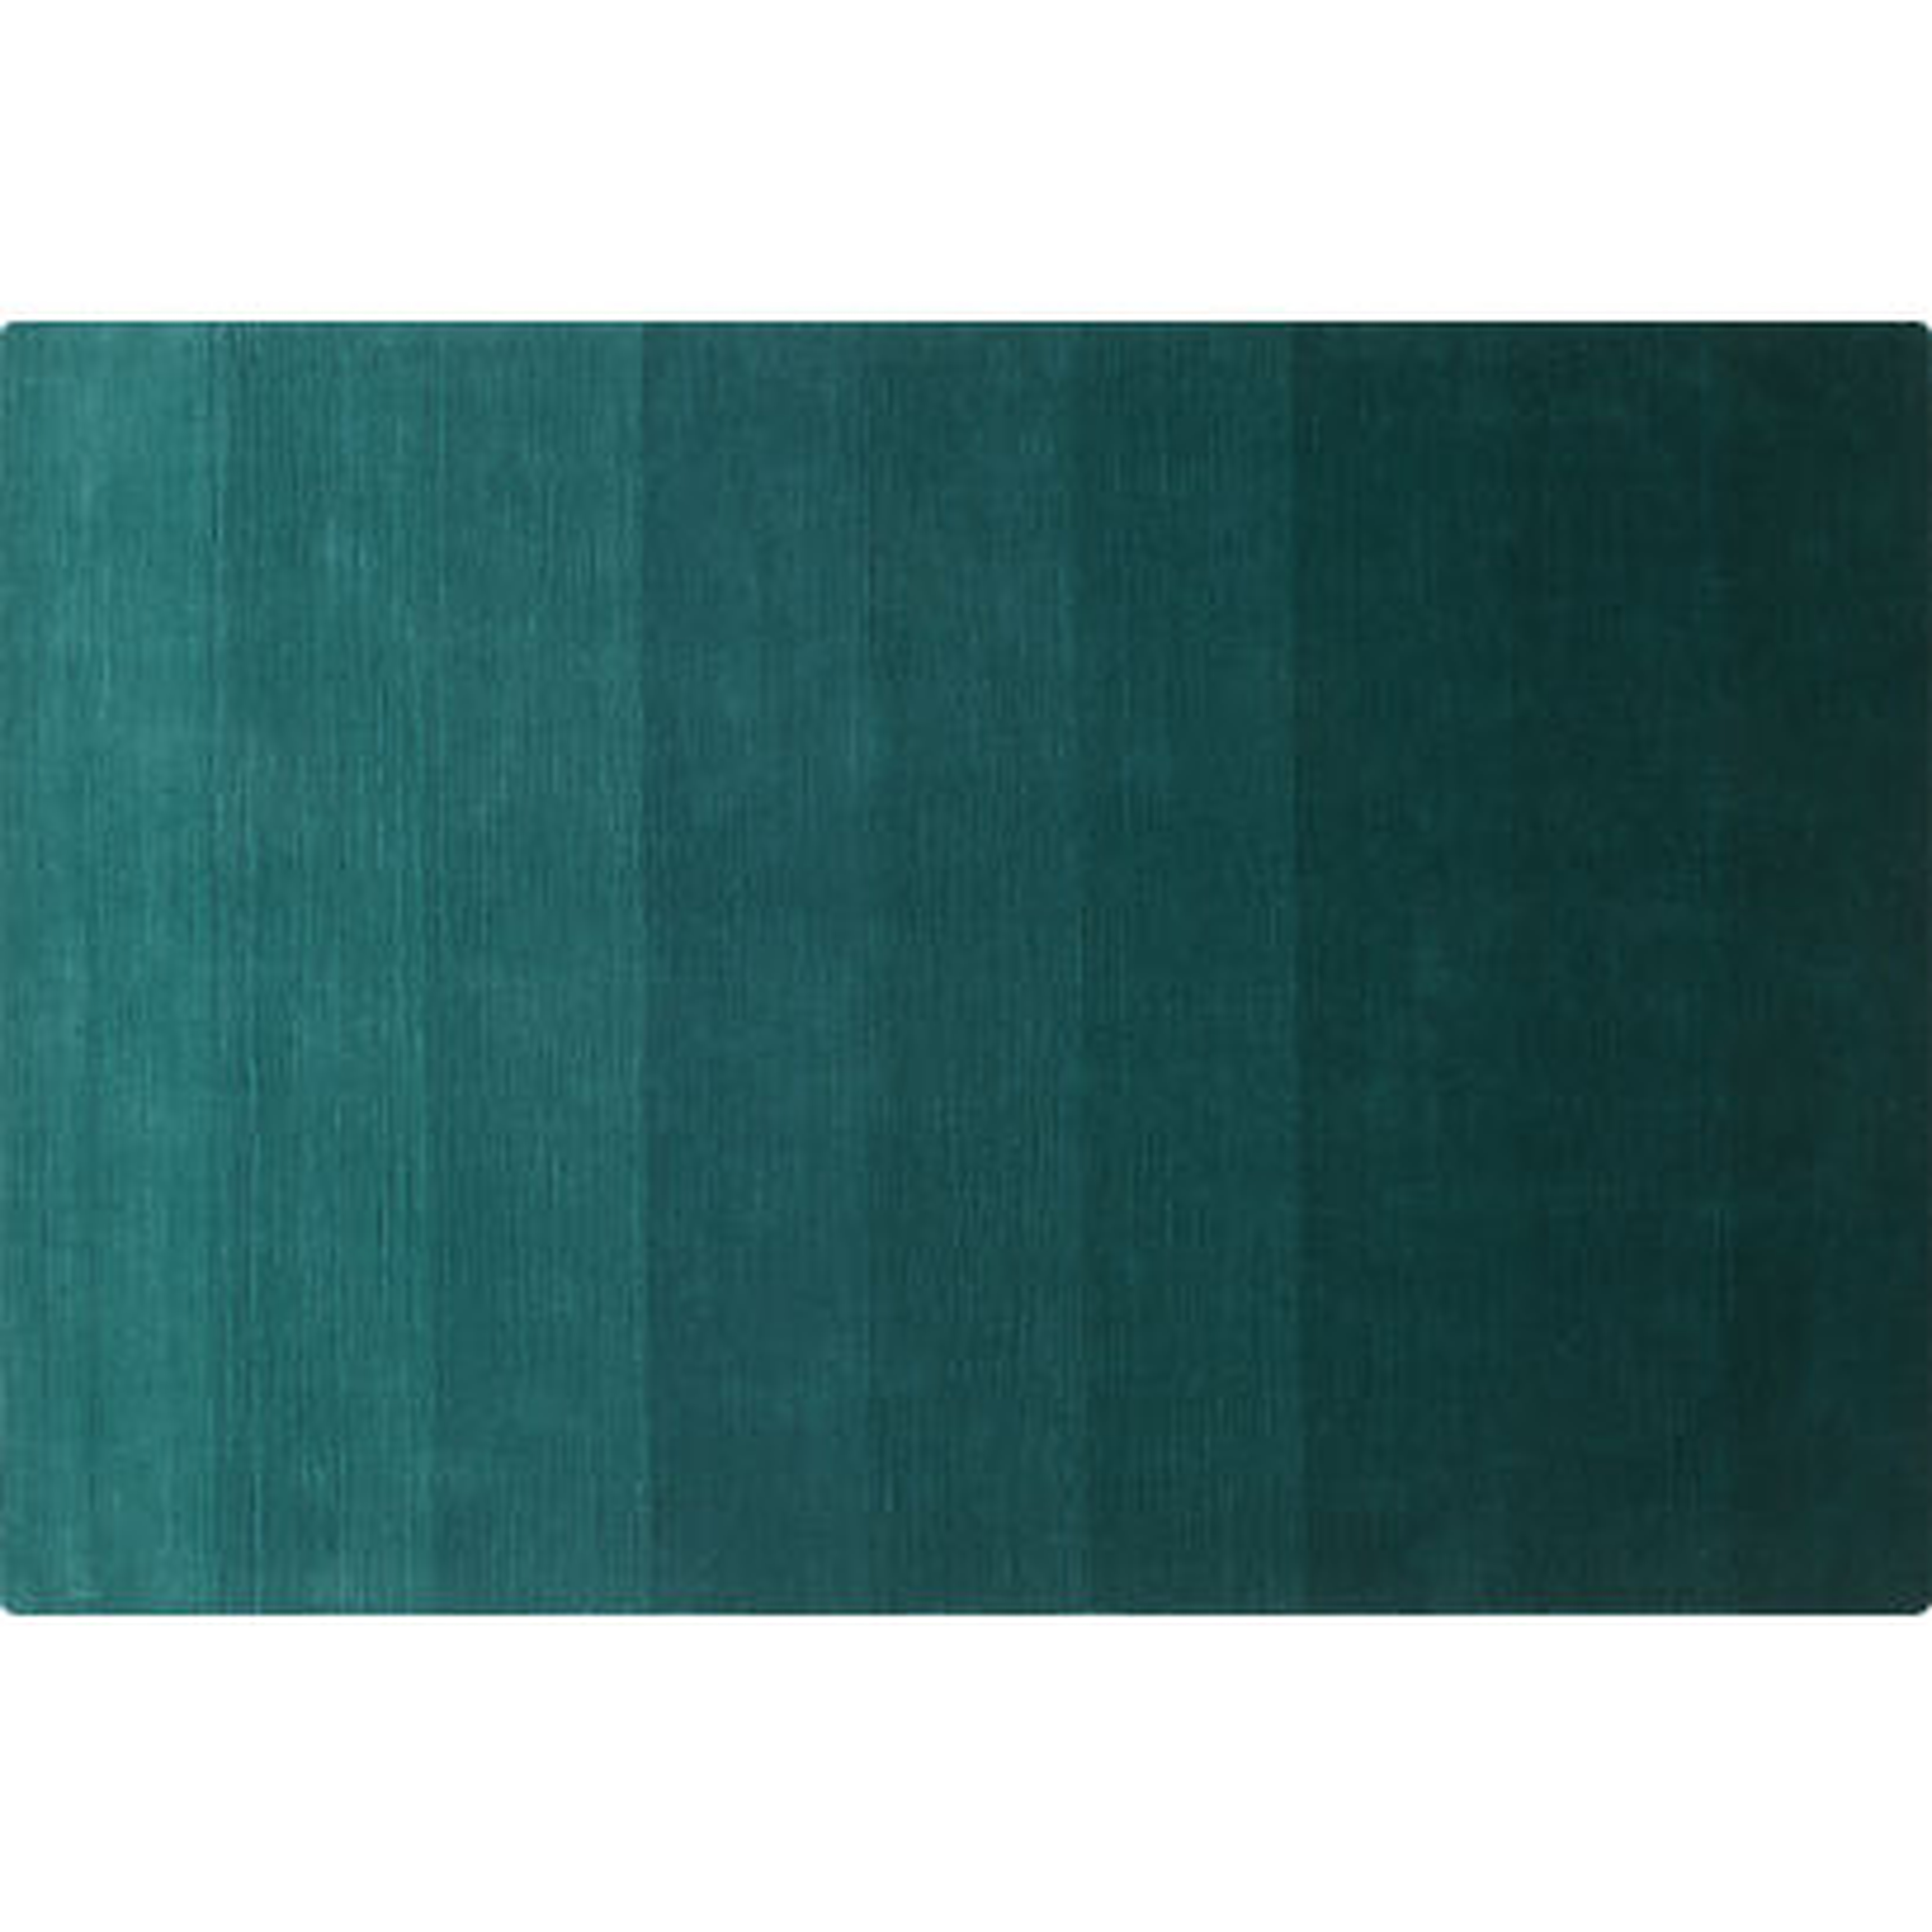 Ombre Teal Rug - CB2